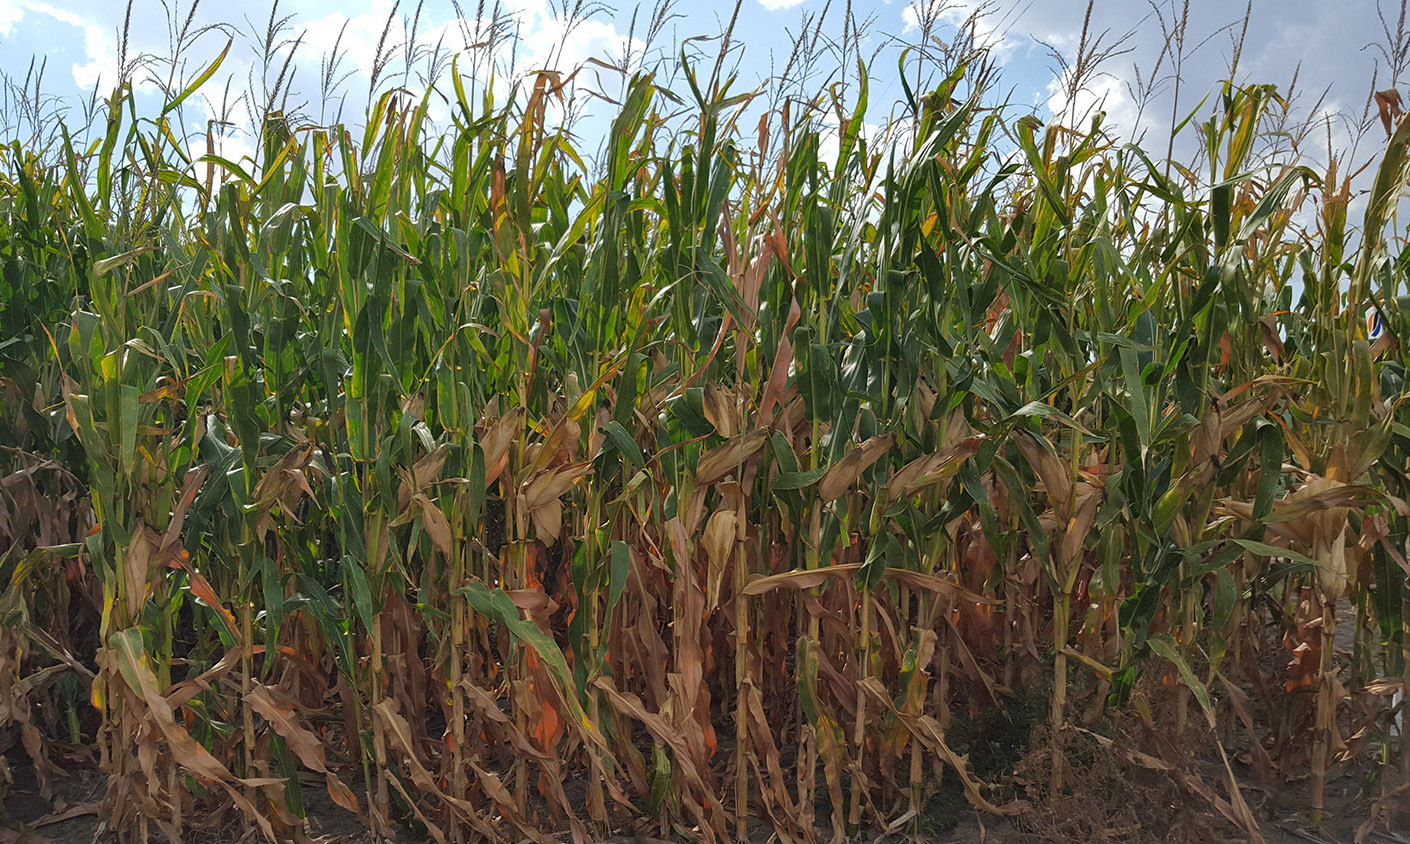 Stalk And Crown Rot Diseases Developing In Some Corn Cropwatch 3847